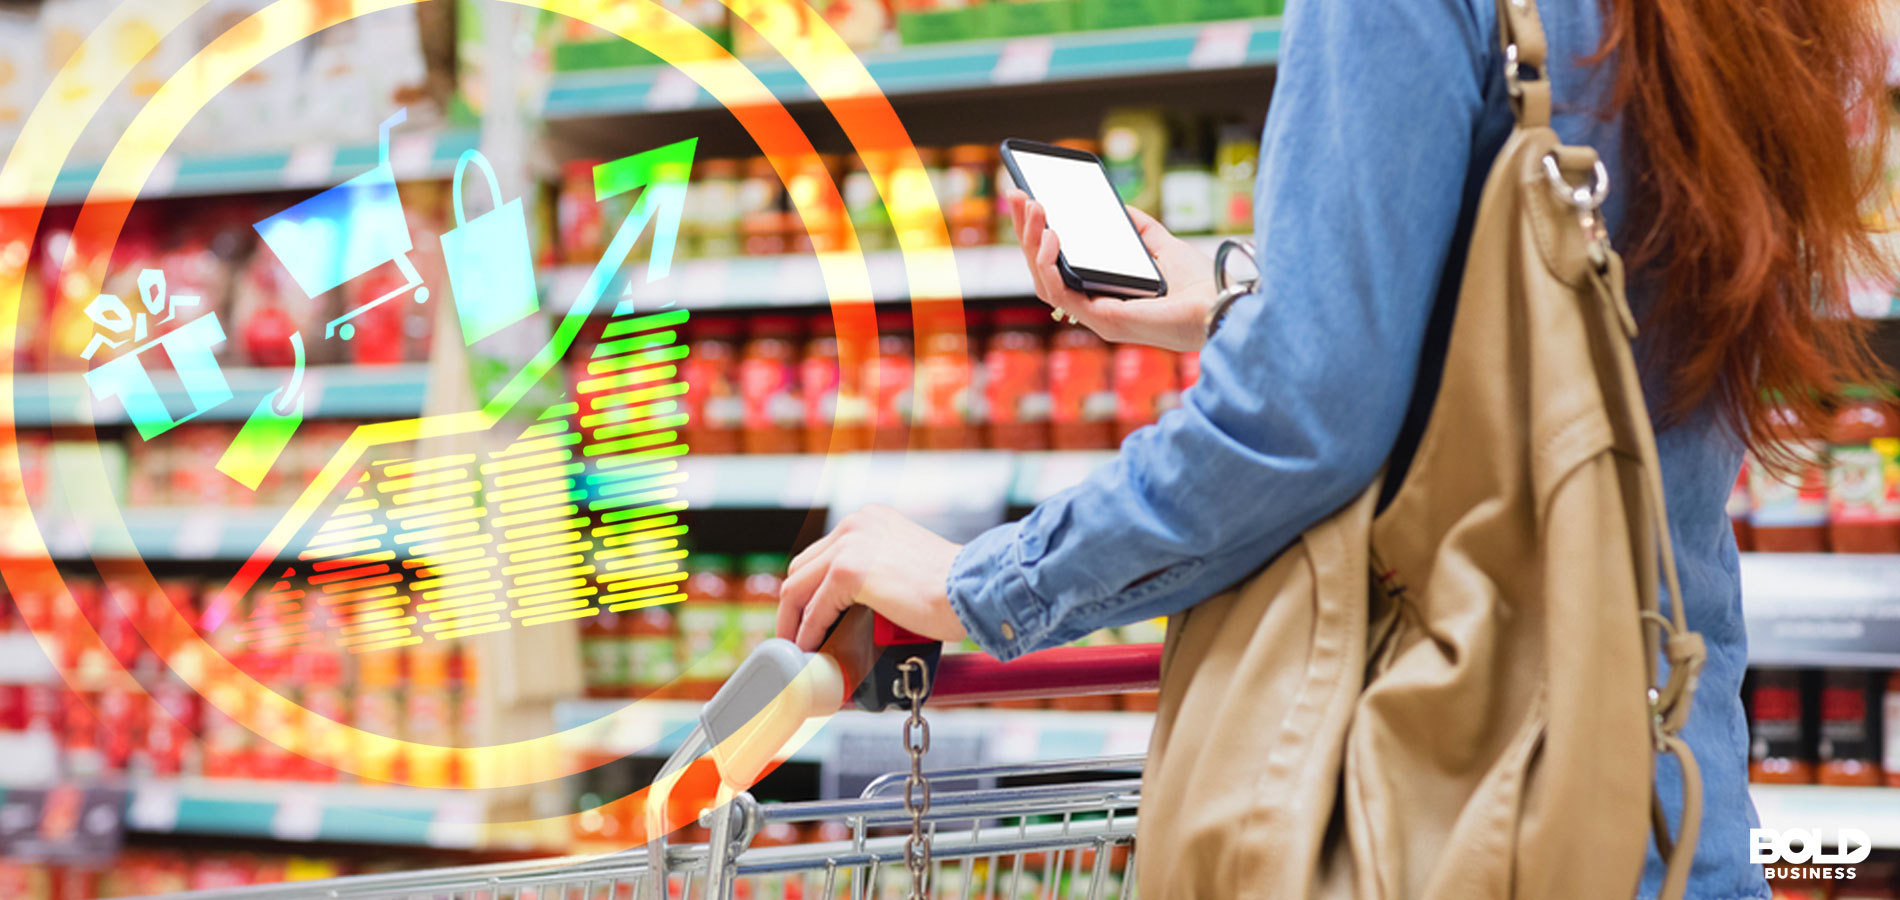 Grocery is Evolving, Here are Six Trends